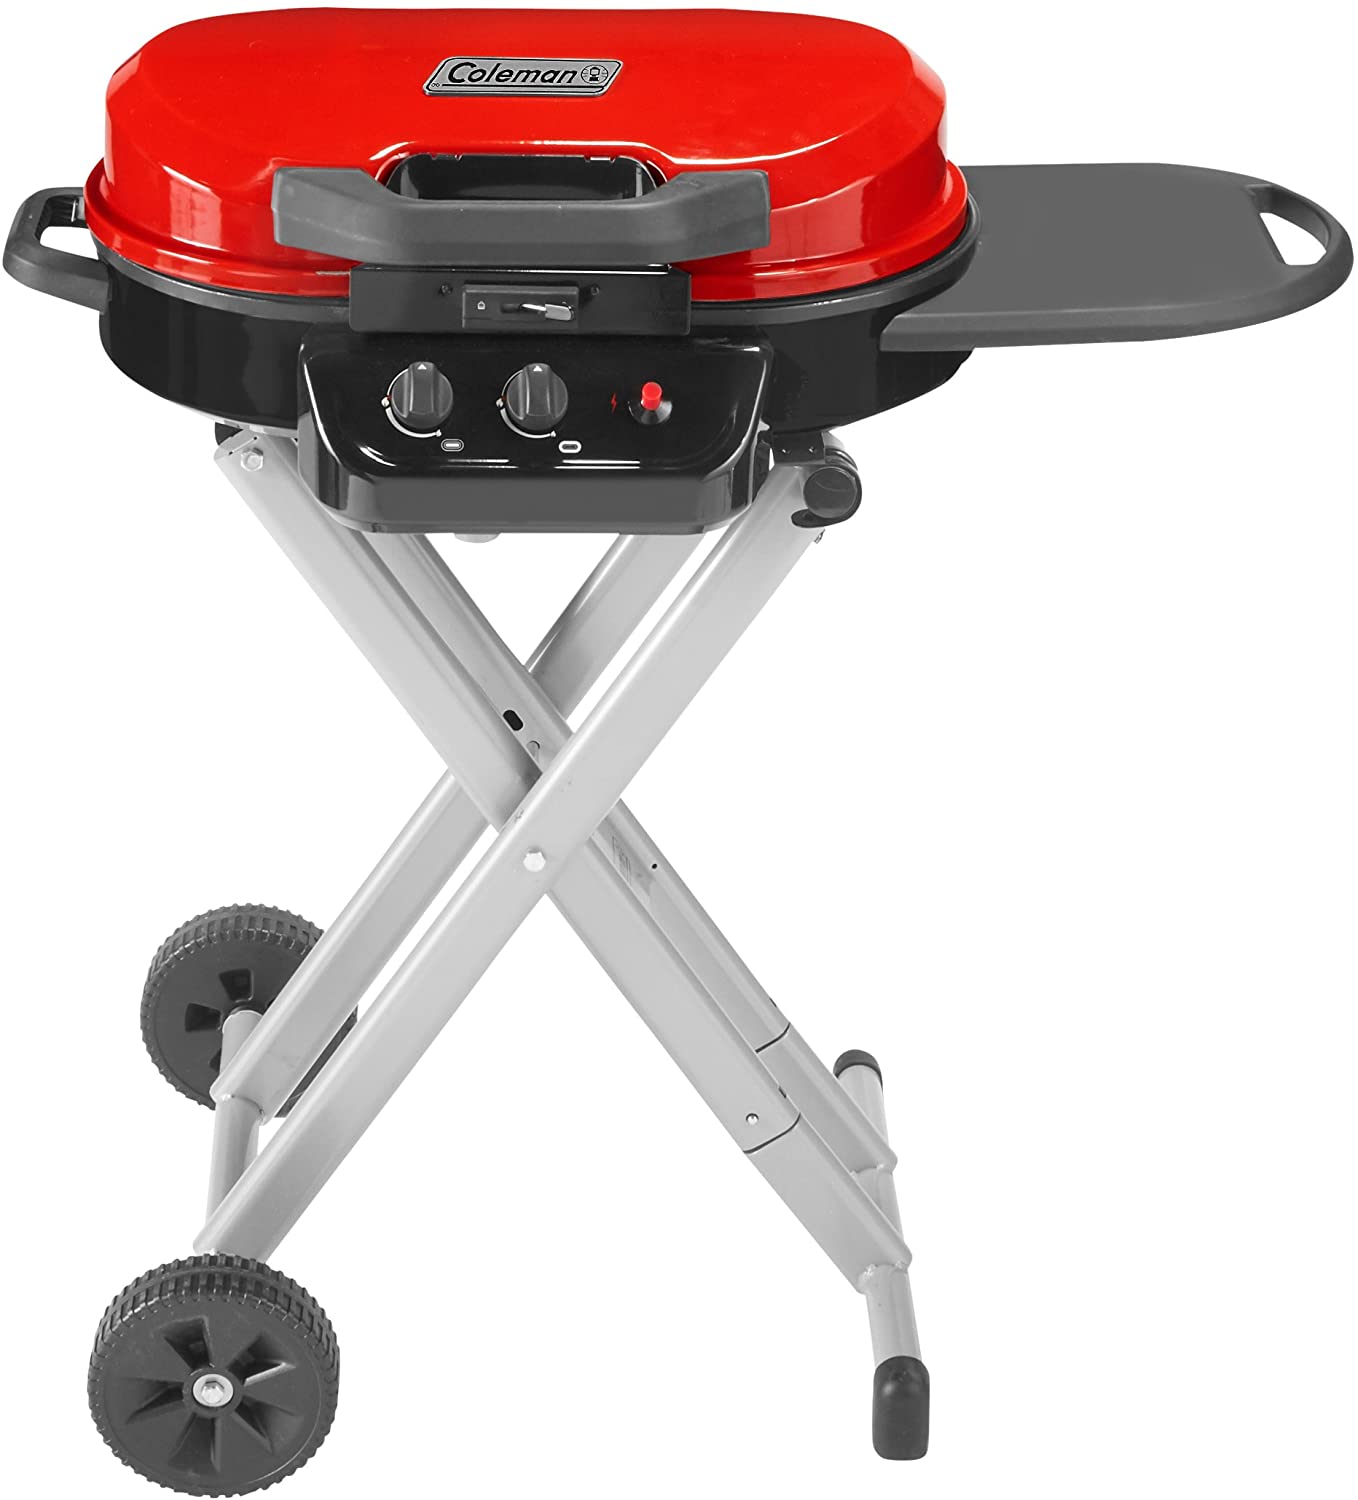 3. Portable Gas Grill